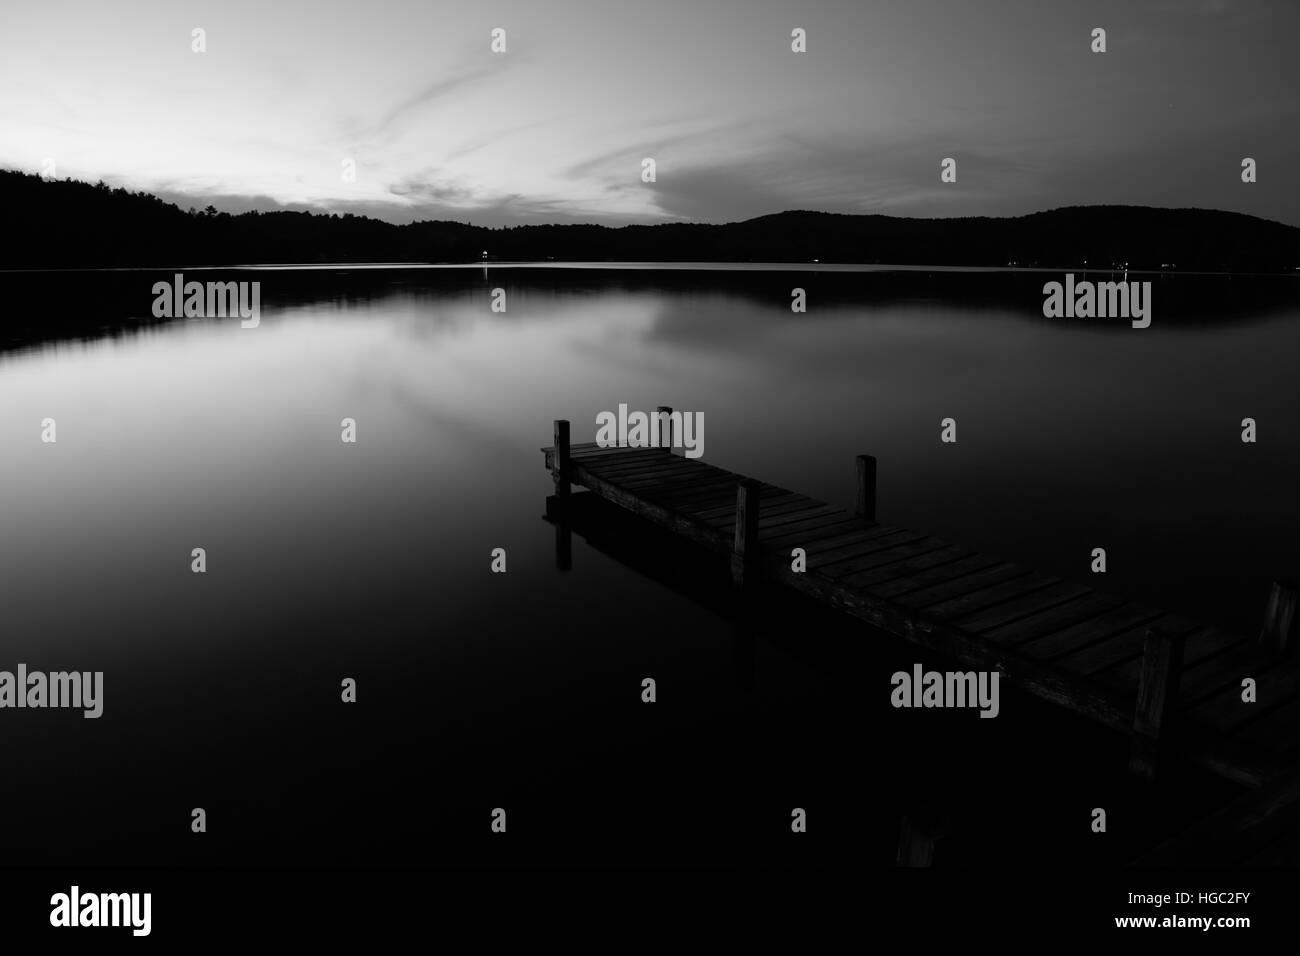 Old wooden jetty at night on a mirror calm lake with reflections and silhouettes long exposure monochrome Stock Photo